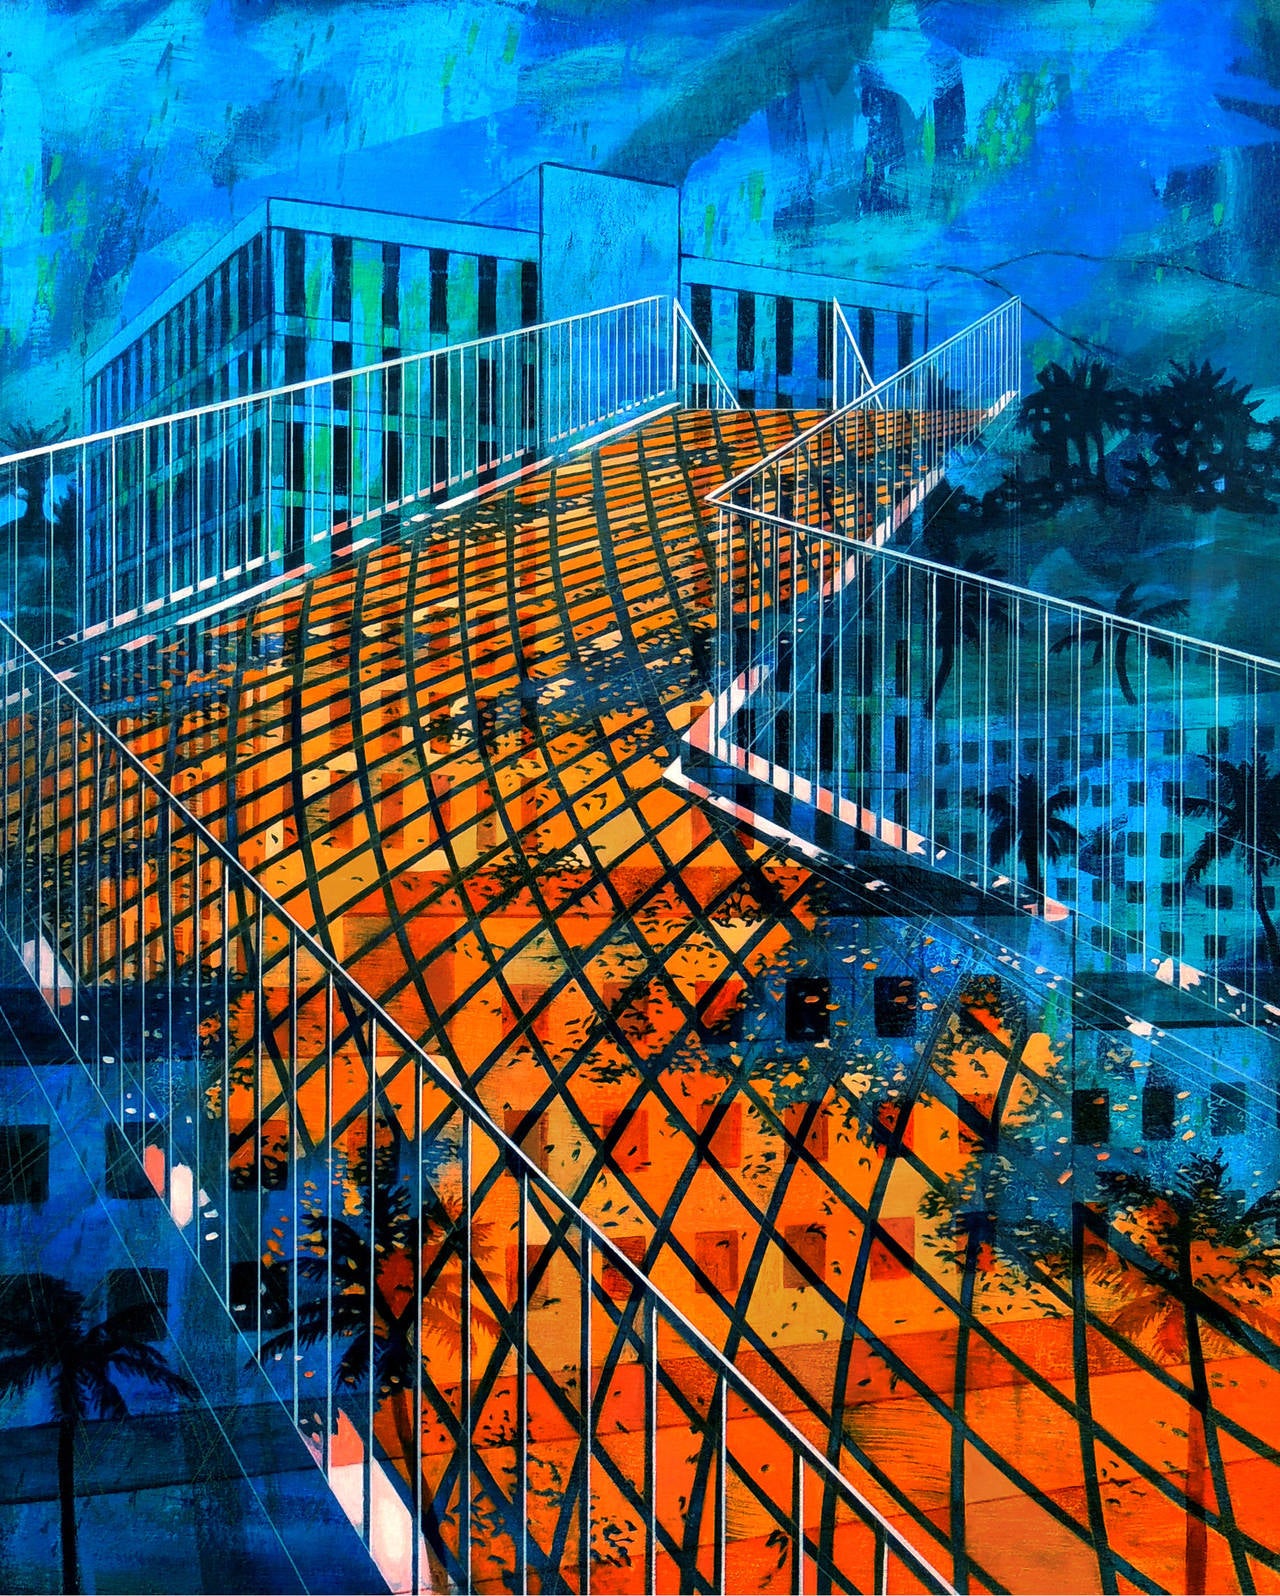 Todd Lanam Landscape Painting - SAN MATEO SKATE SPOT, bright orange, blue, overlaid perspectives, staircase